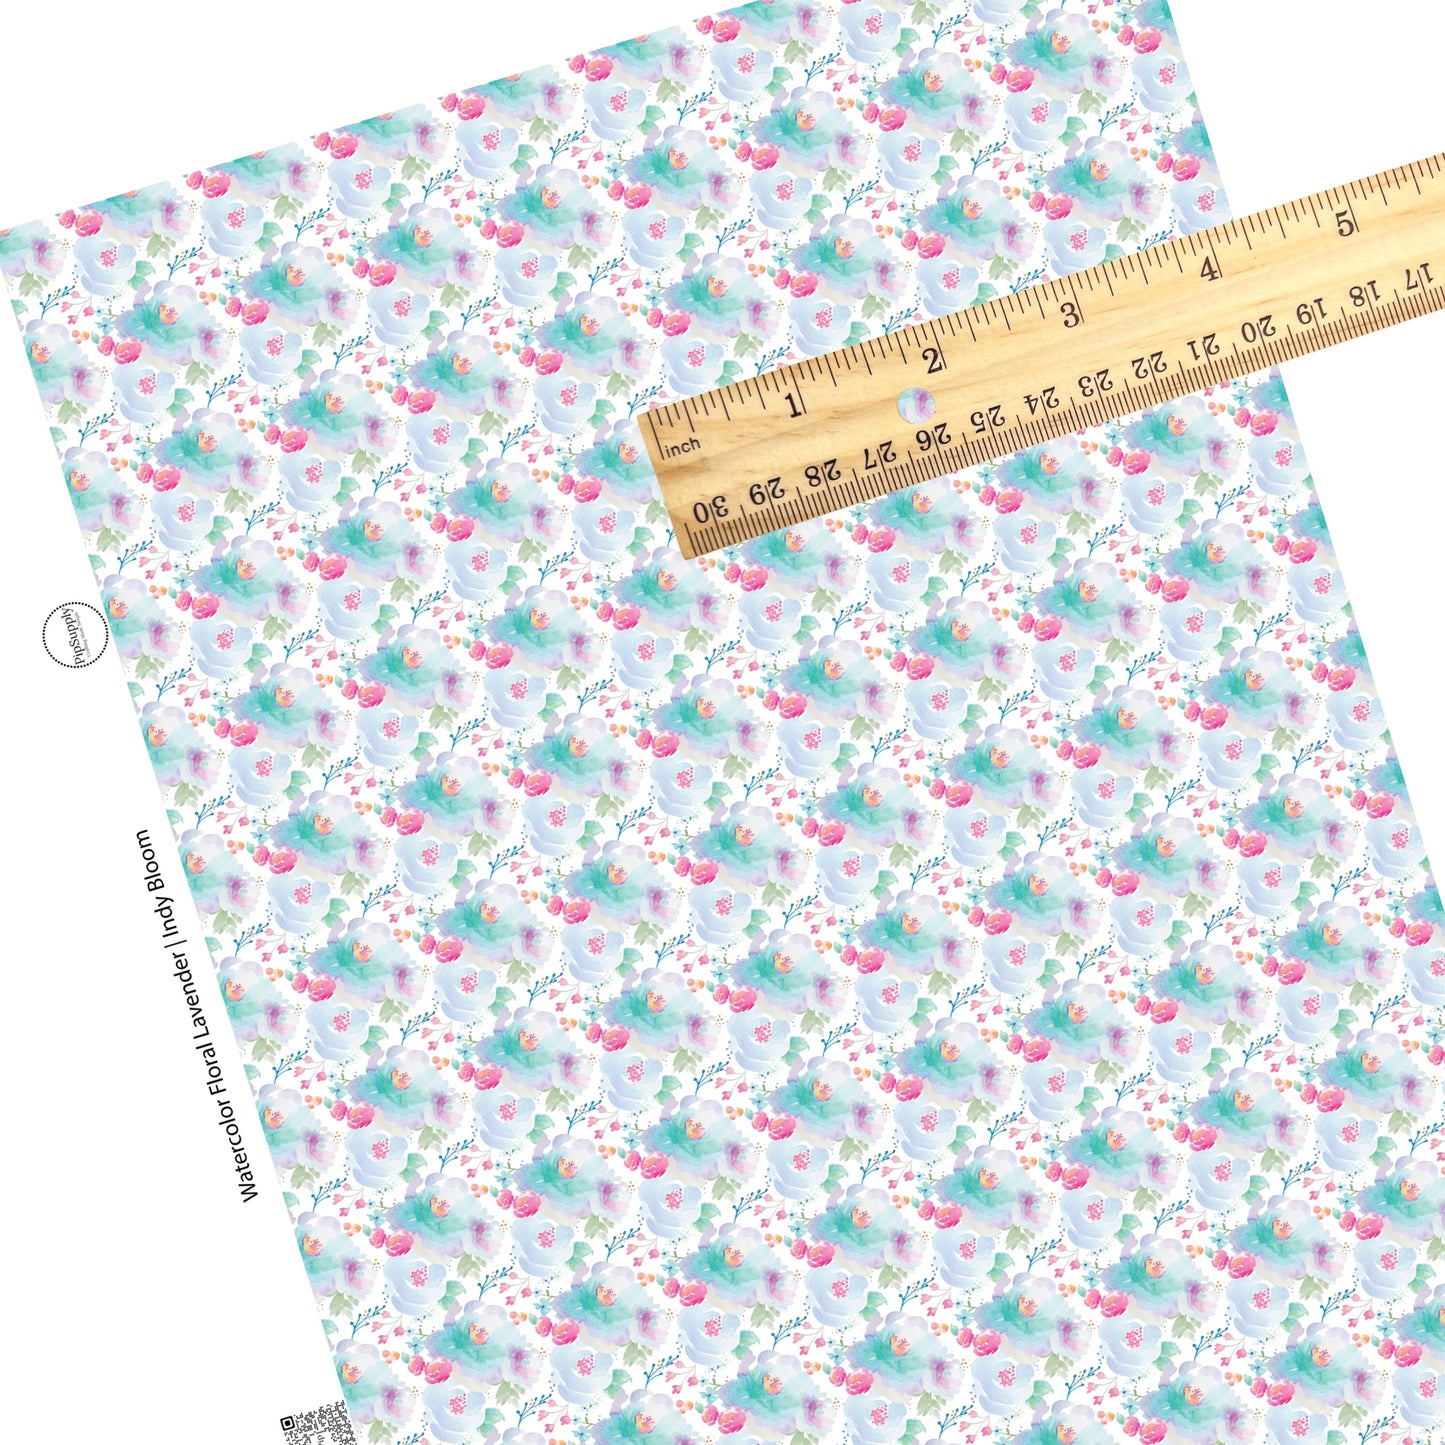 These pastel watercolor flowers on white faux leather sheets contain the following design elements: flowers in the colors of light pink, peach, light blue, teal, and green. 